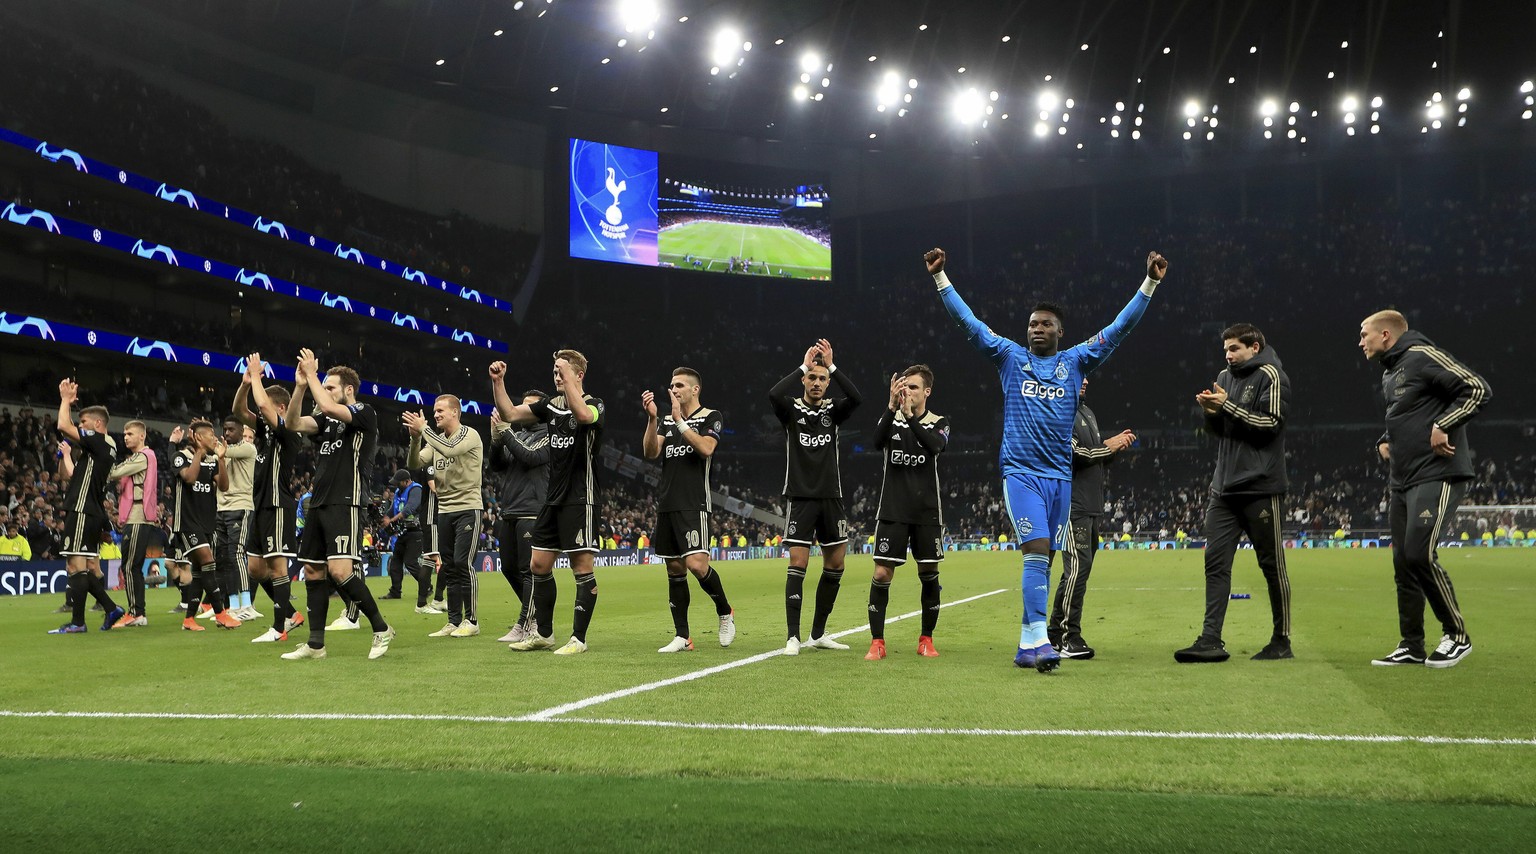 Ajax players celebrate after the final whistle of the Champions League, semifinal first leg soccer match at the Tottenham Hotspur Stadium, London, Tuesday April 30, 2019. Ajax beat Tottenham 1-0. (Mik ...